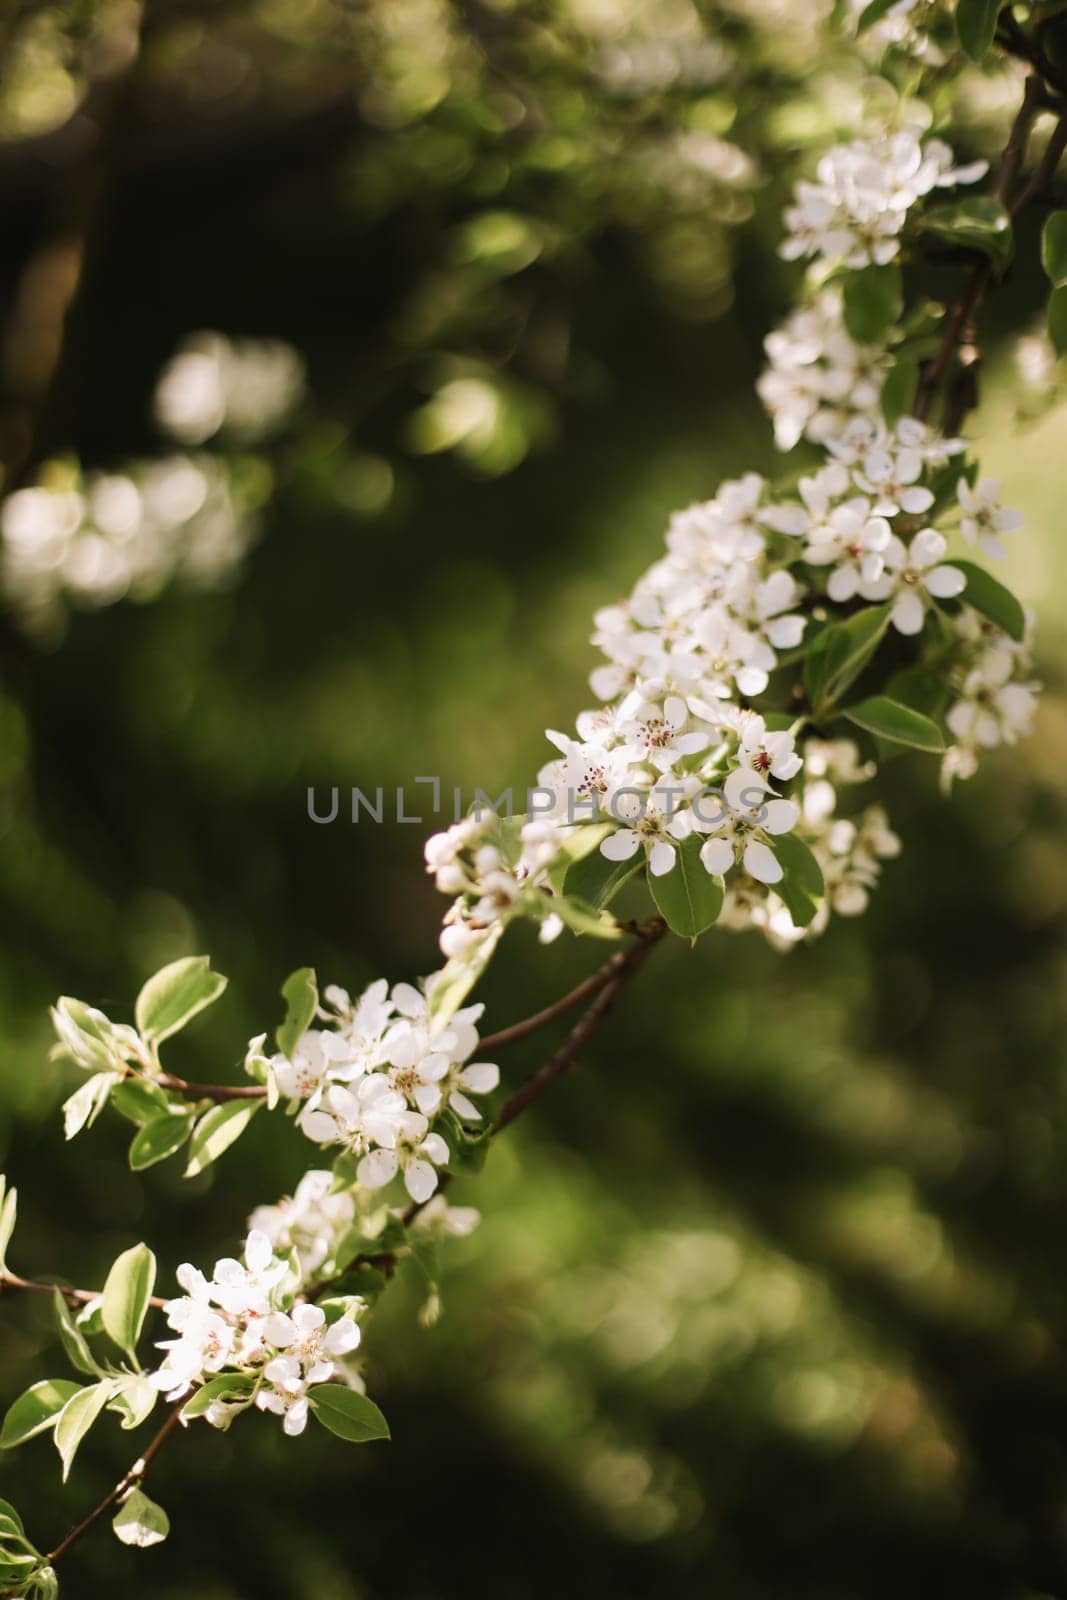 Branches of blossoming cherry or apple tree macro with soft focus on gentle light nature background in sunlight with copy space. Beautiful floral image of spring nature panoramic view by paralisart